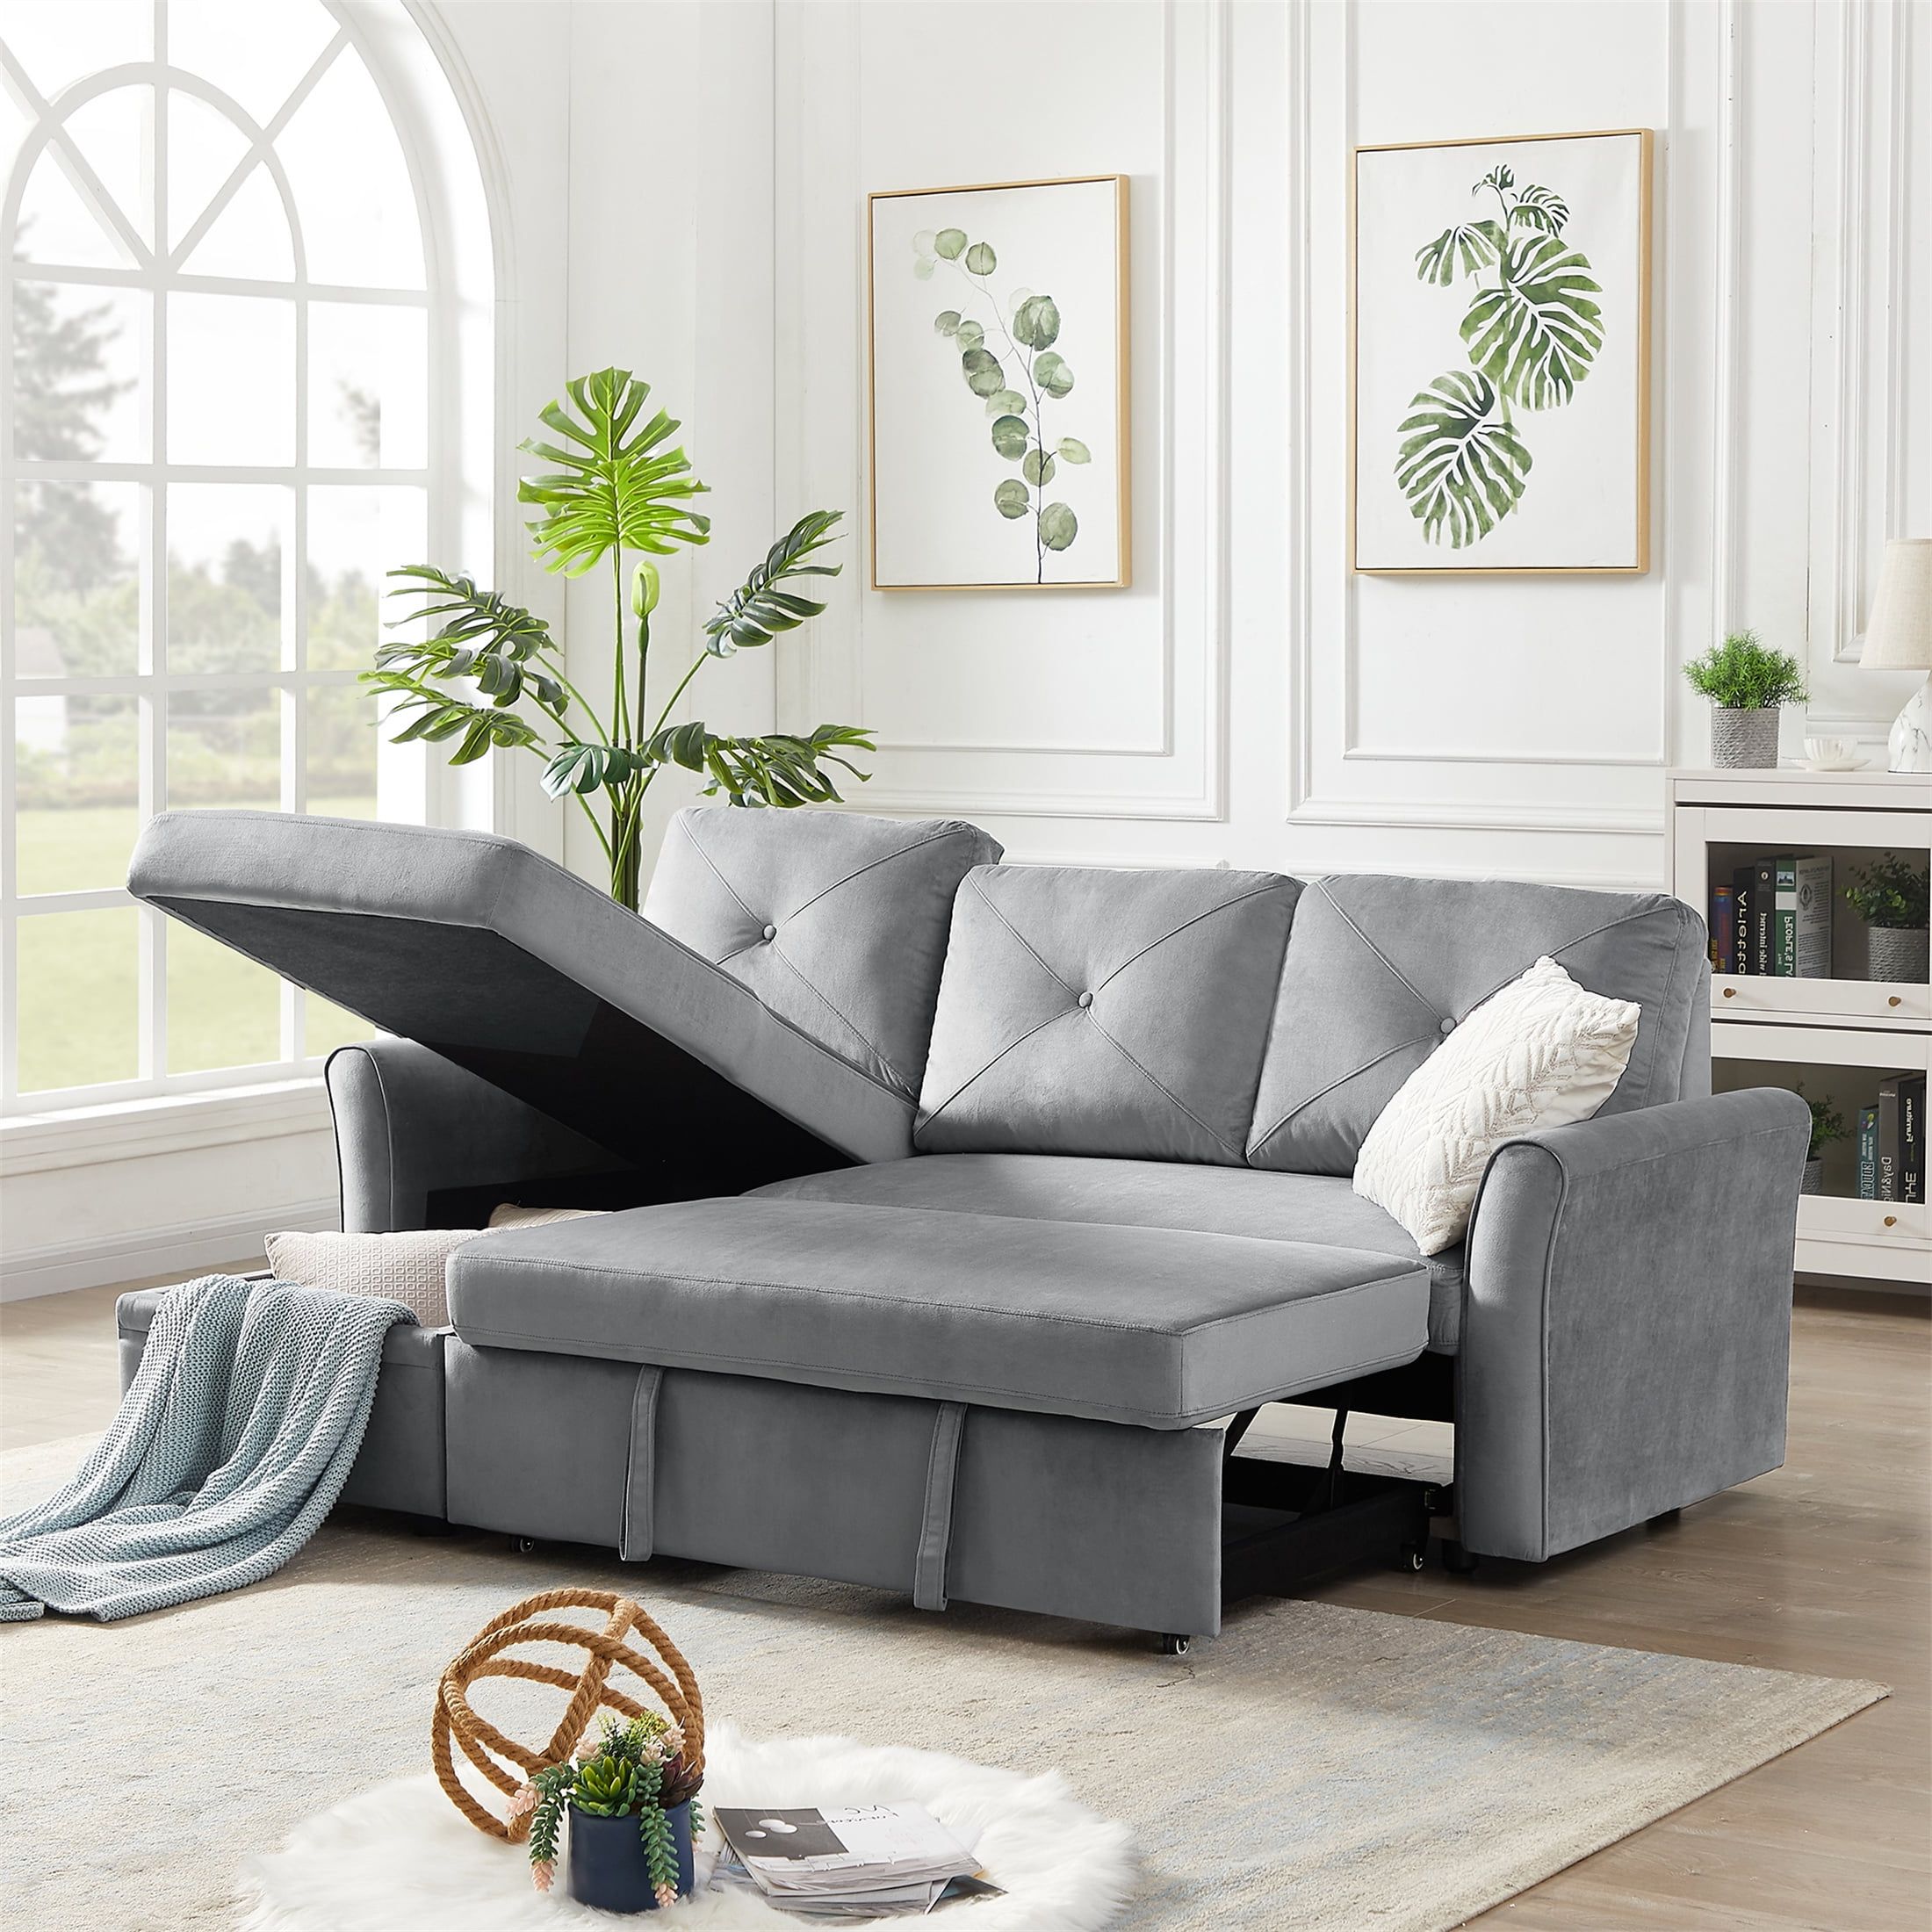 Aukfa Modern Velvet Sectional Sleeper Sofa  Pull Out Bed  Reversible Throughout Most Up To Date Modern Velvet Sofa Recliners With Storage (View 2 of 15)